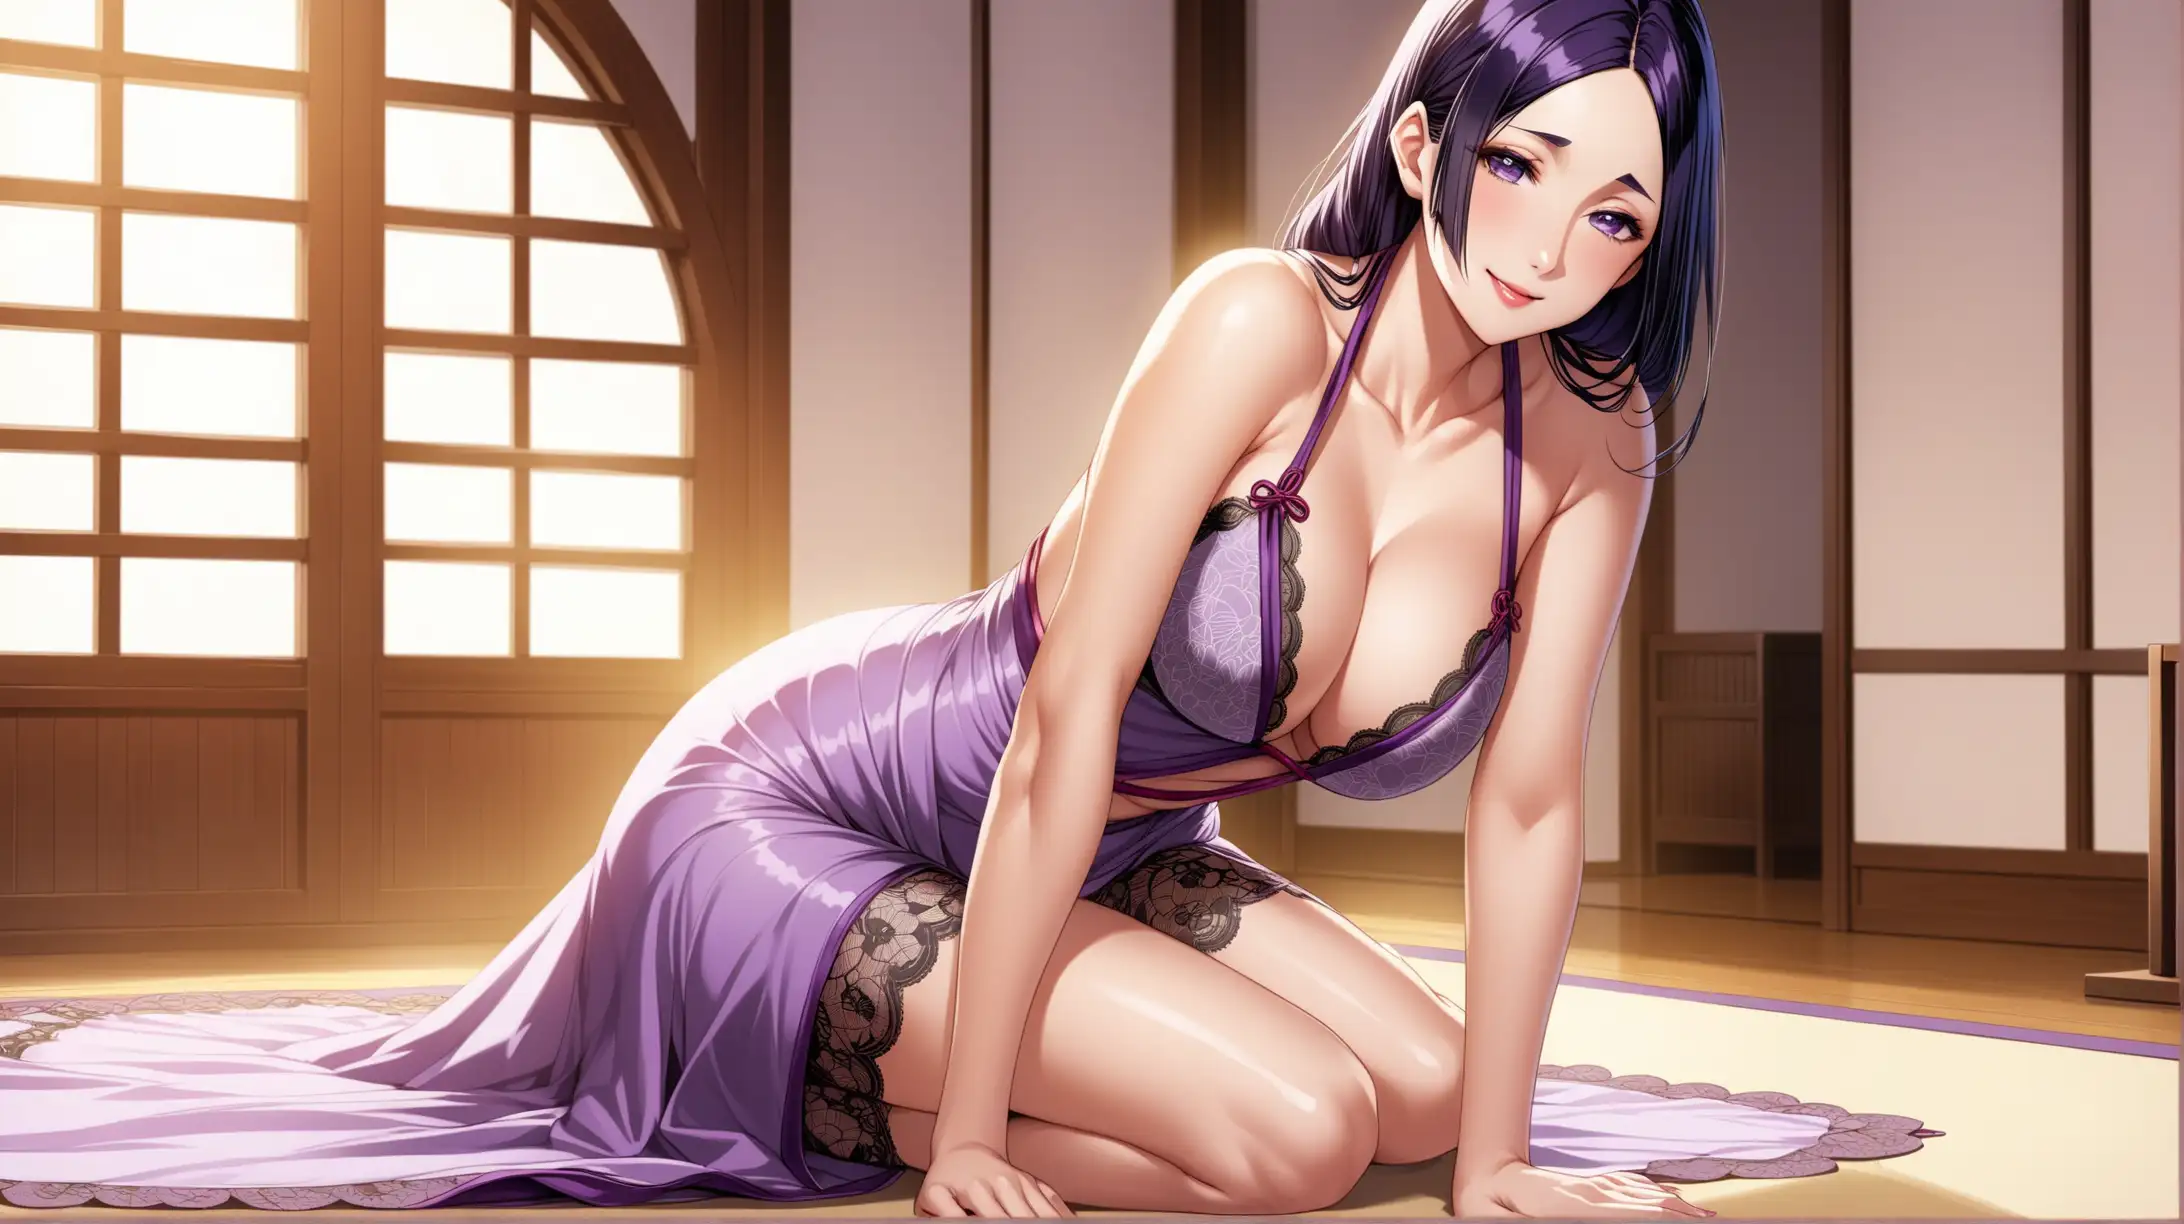 Draw the character Minamoto no Raikou, high quality, seductive pose, indoors on a sunny day, wearing a lacy dress, smiling at the viewer